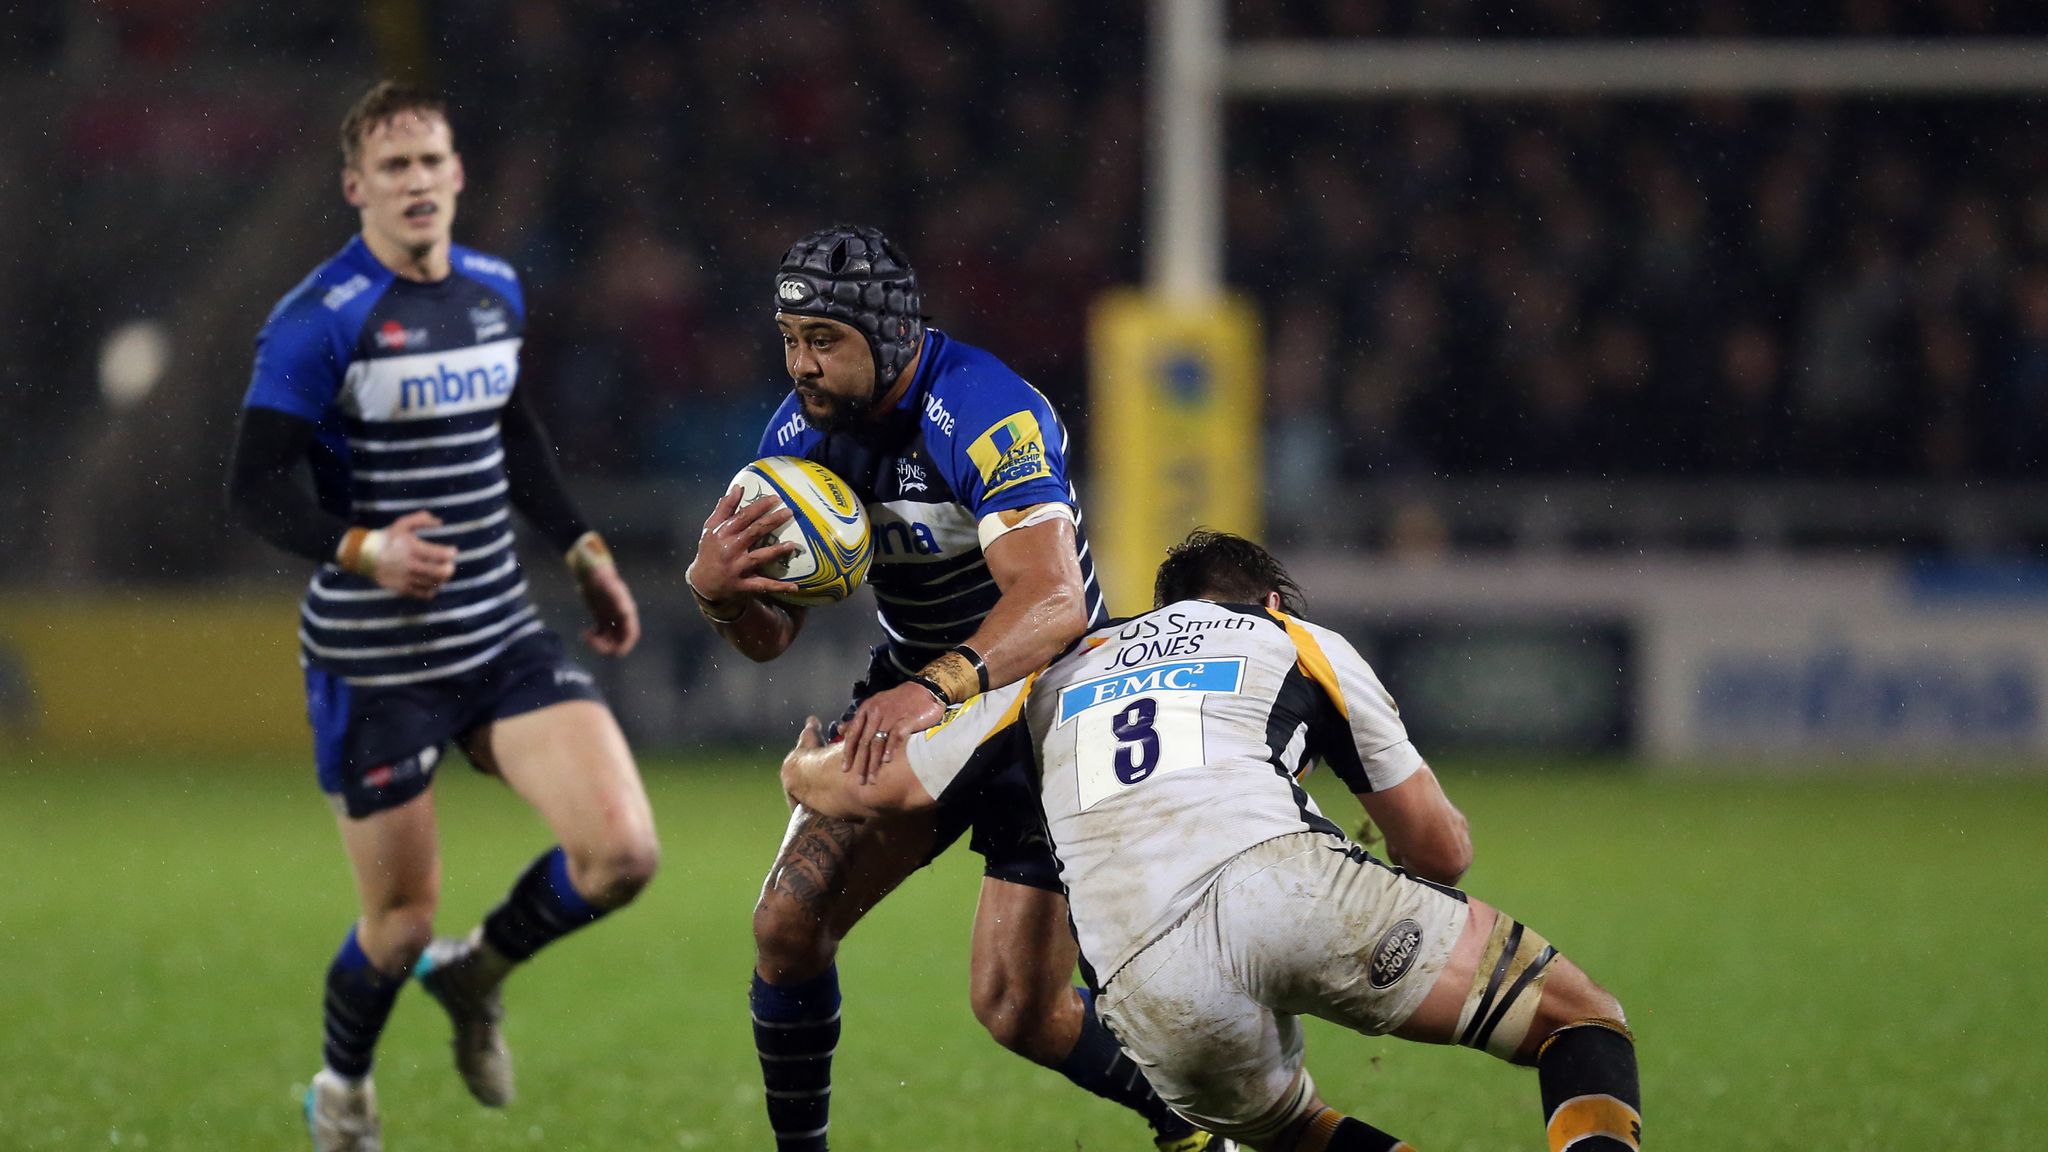 Dan Carter up and running in style as Racing beat Northampton